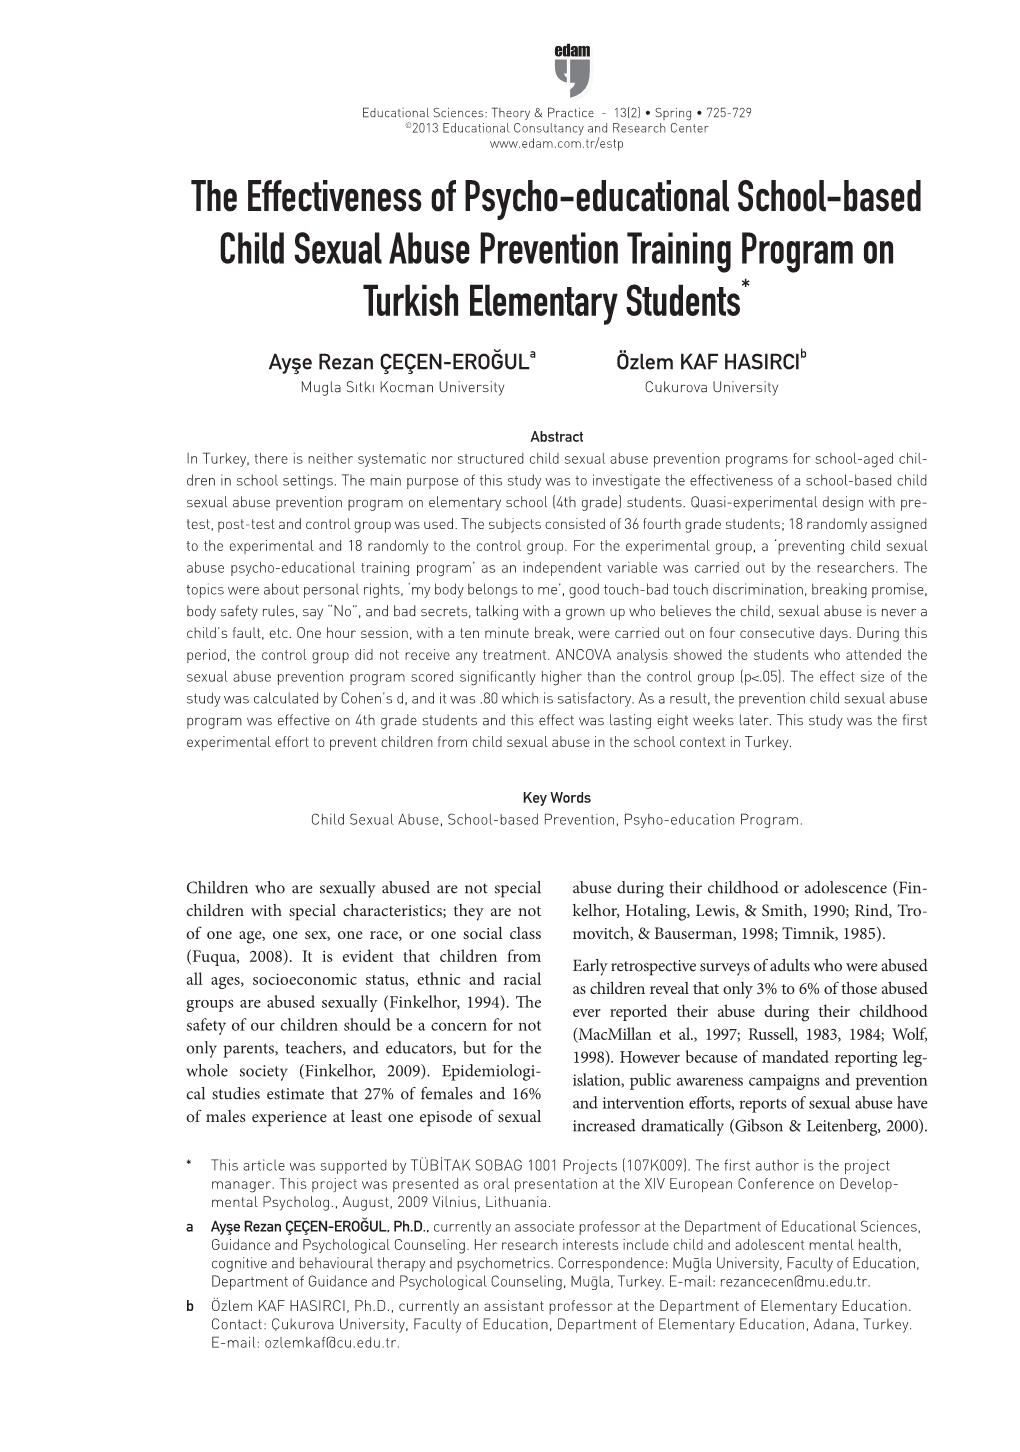 The Effectiveness of Psycho-Educational School-Based Child Sexual Abuse Prevention Training Program on Turkish Elementary Students*